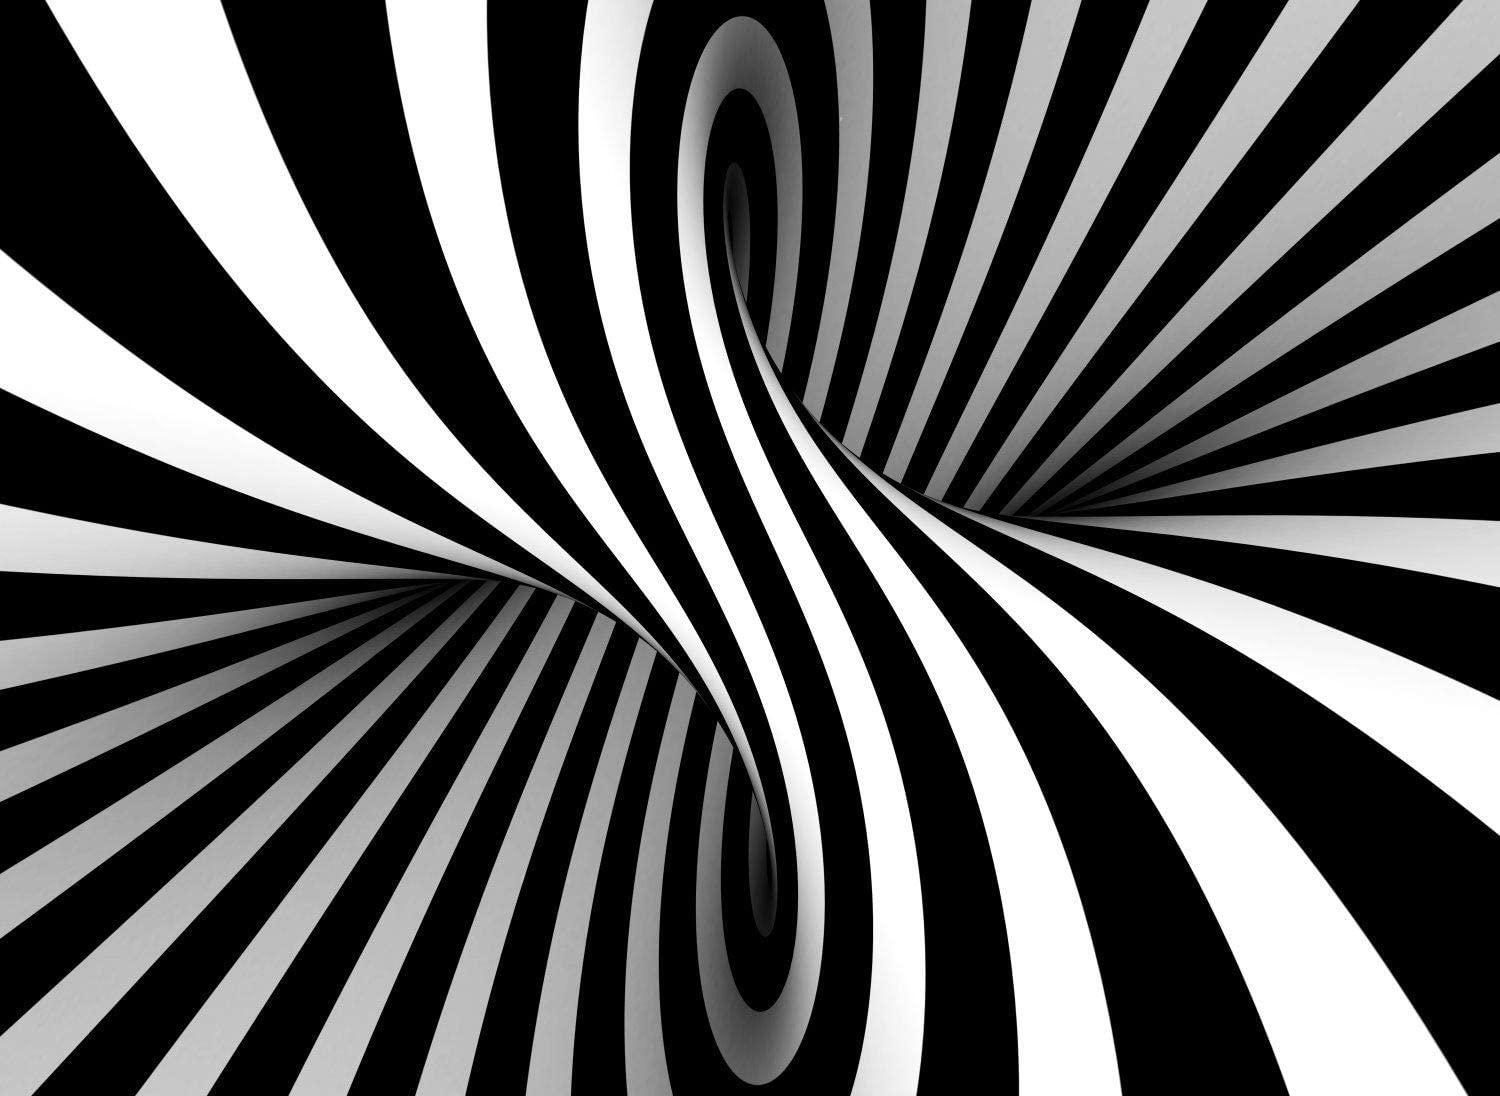 Black and White Spiral